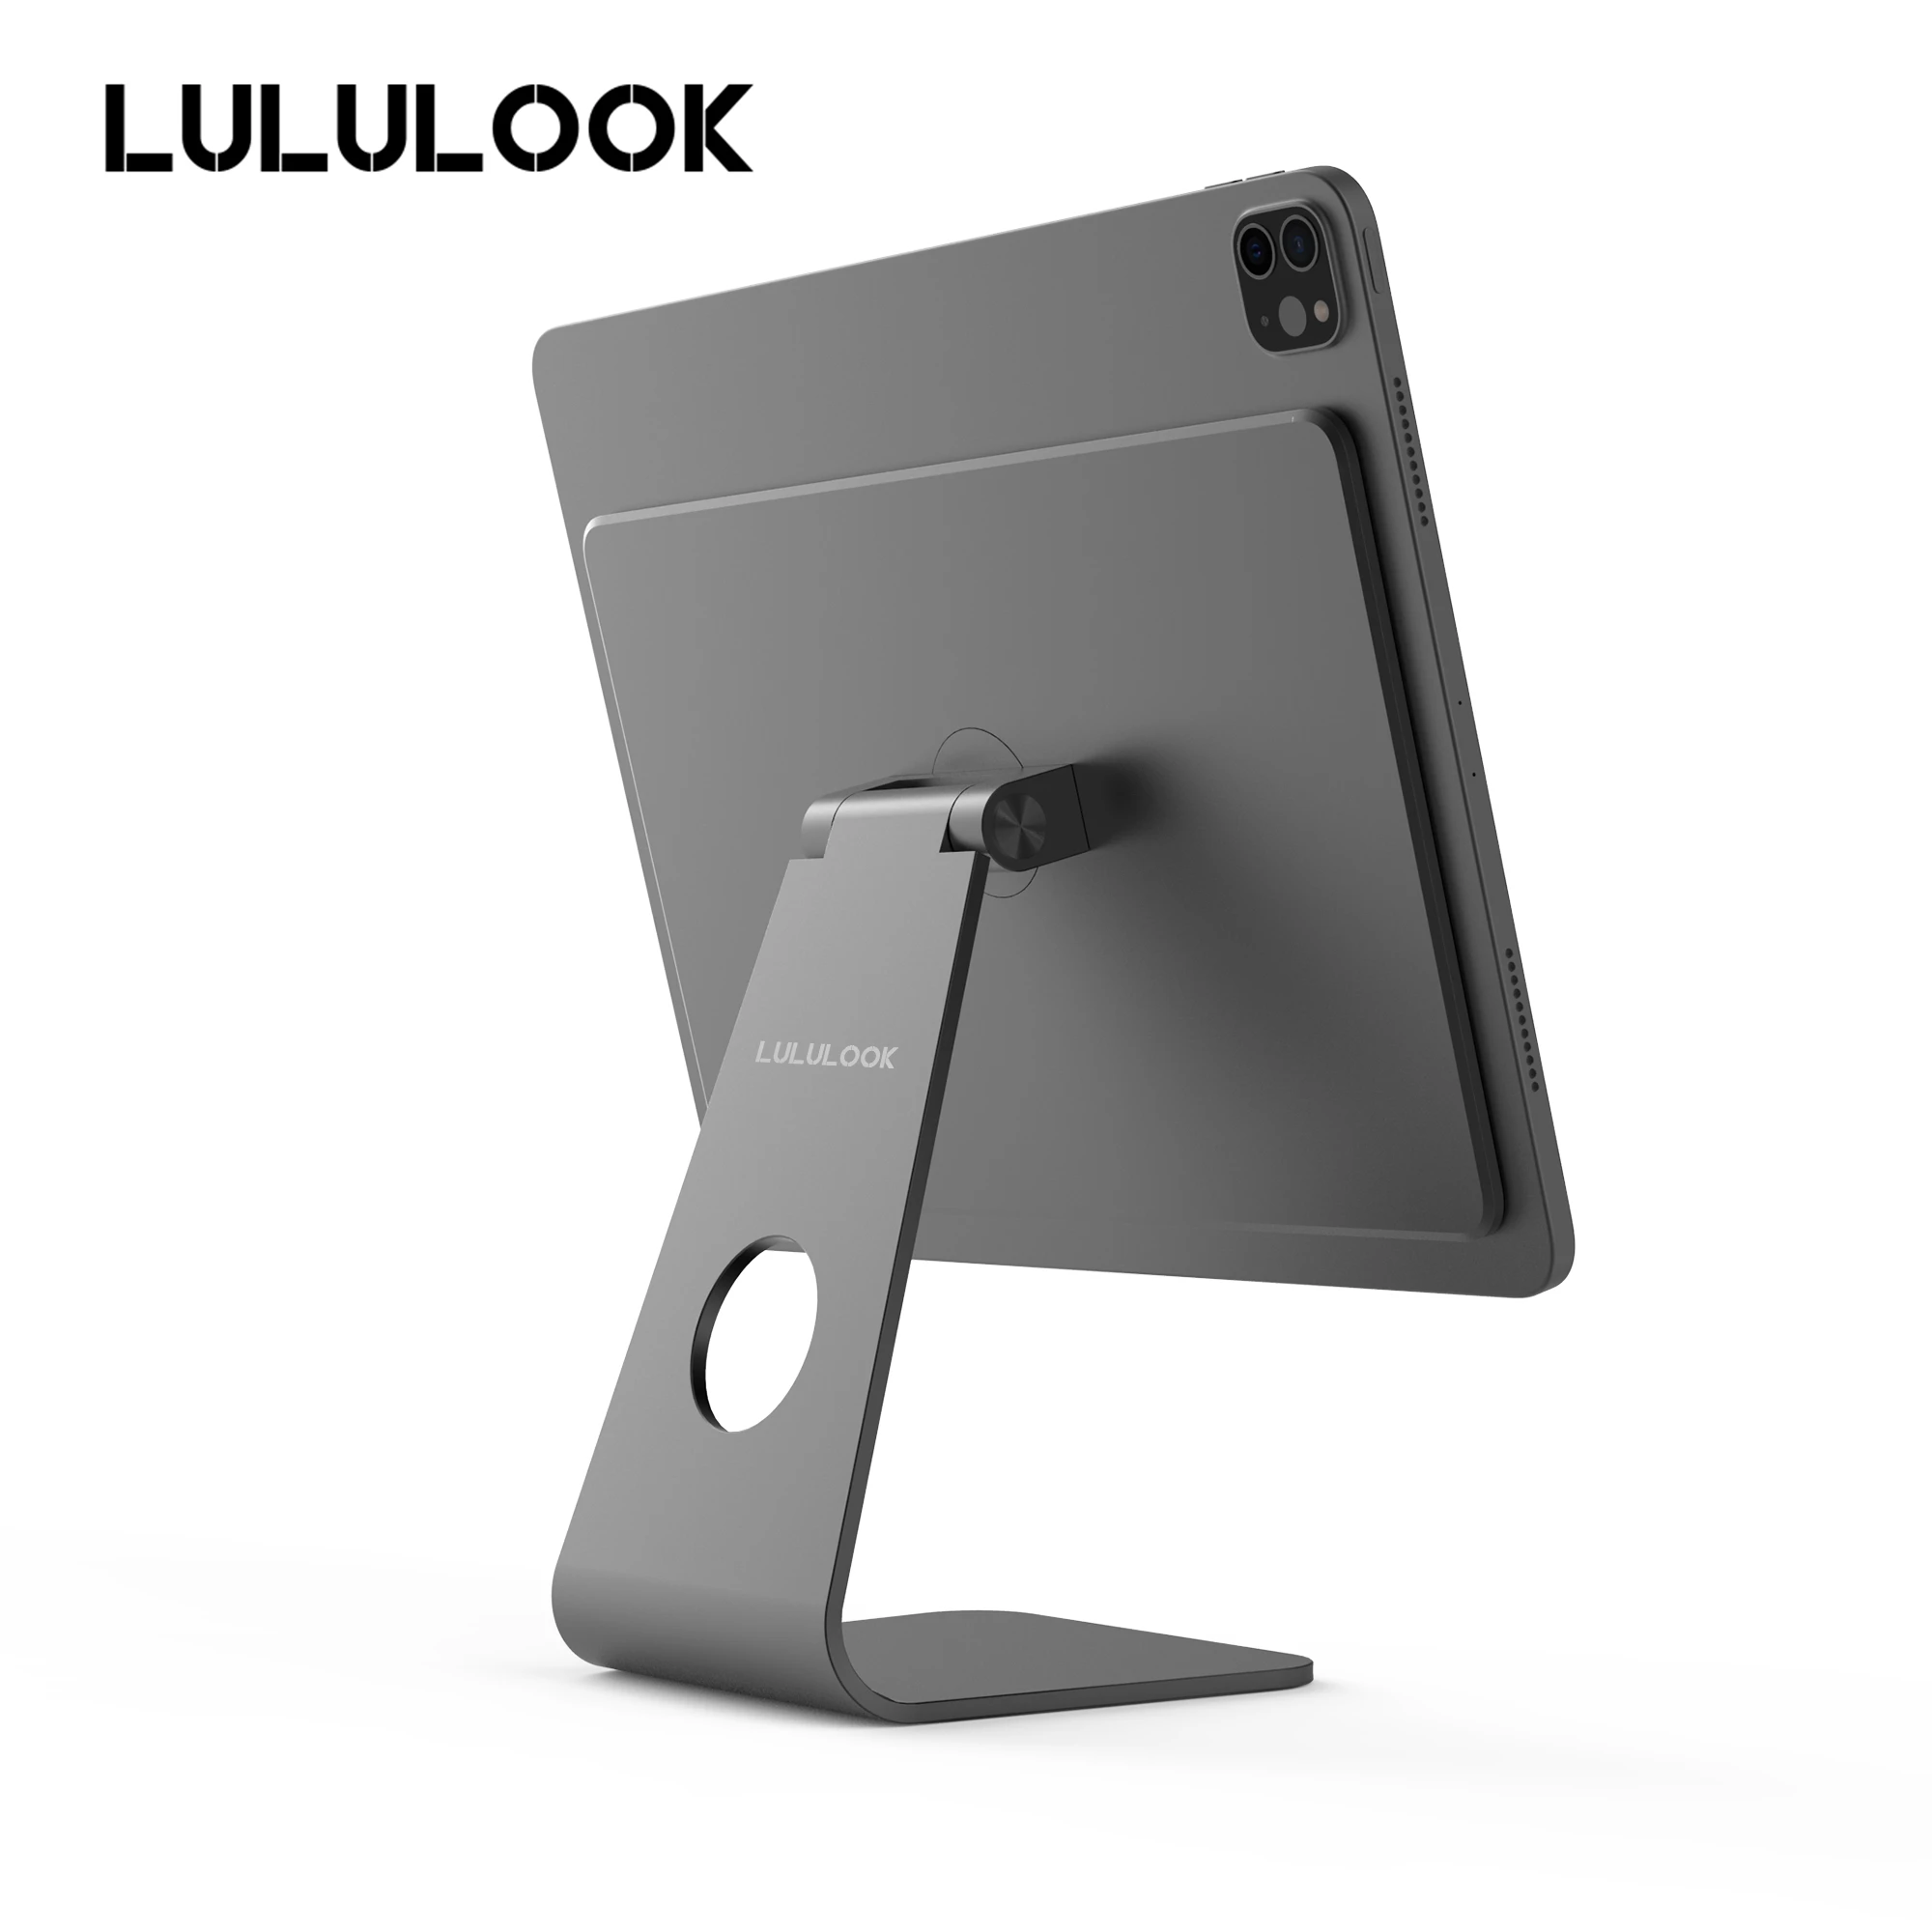 Lululook Tablet Desktop Stand For Apple iPad Pro 11/12.9 inch Stand Adjustable Magnetic Stand Aluminum Holder For Air 5/4th Gen